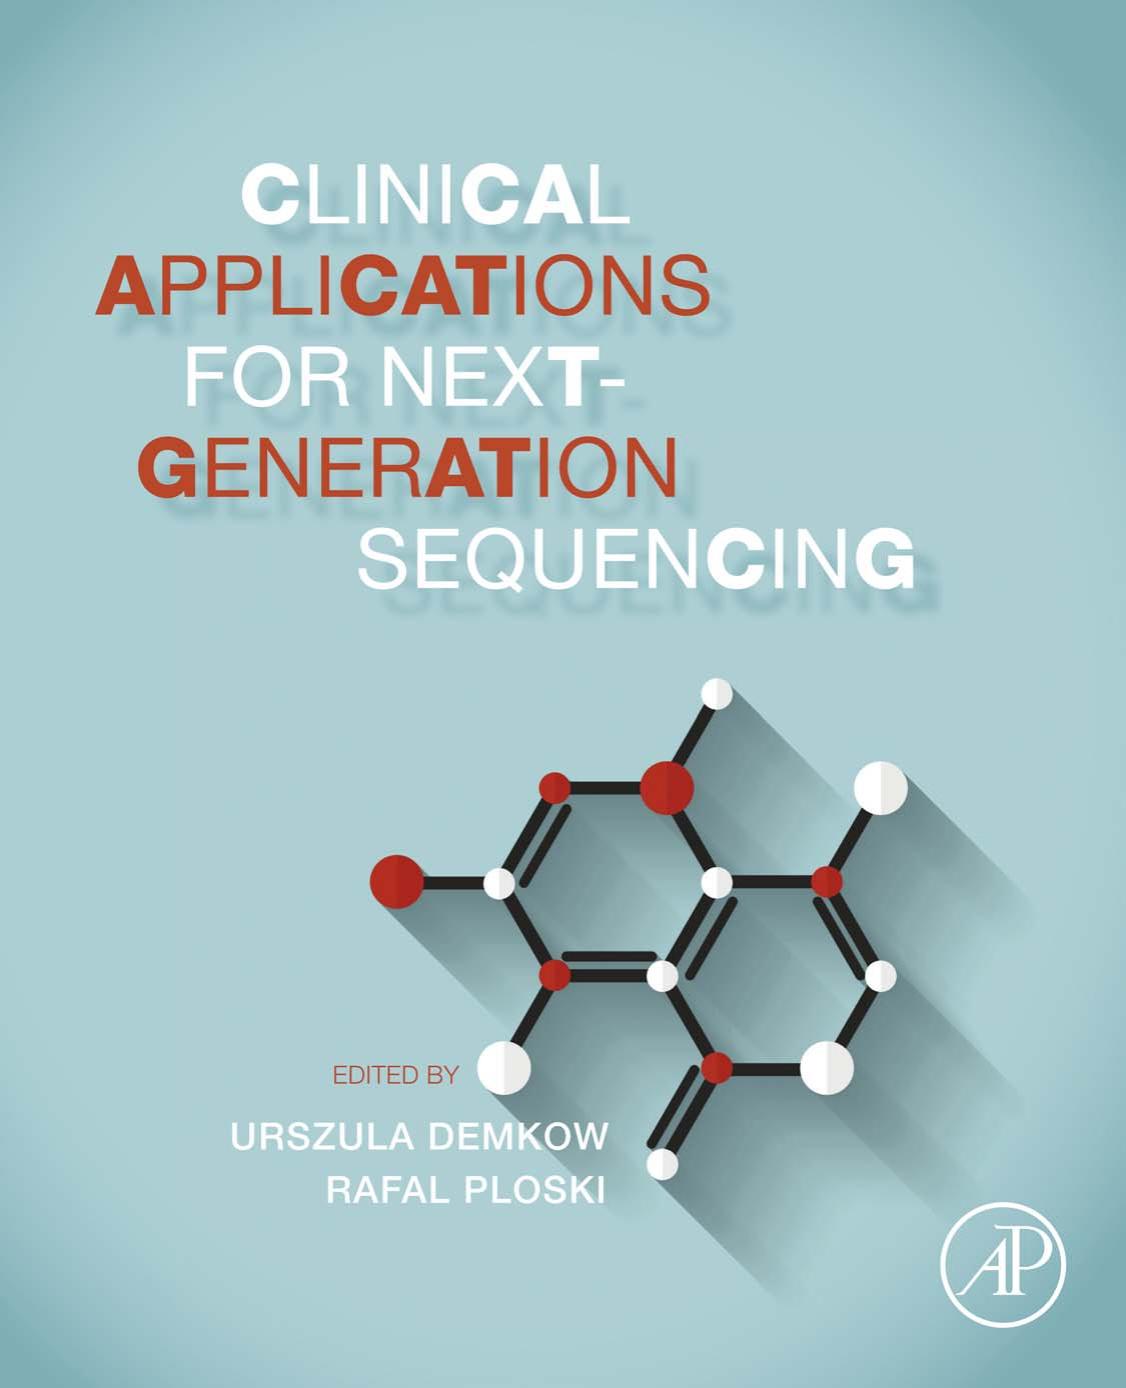 Clinical Applications for Next-Generation Sequencing.jpg